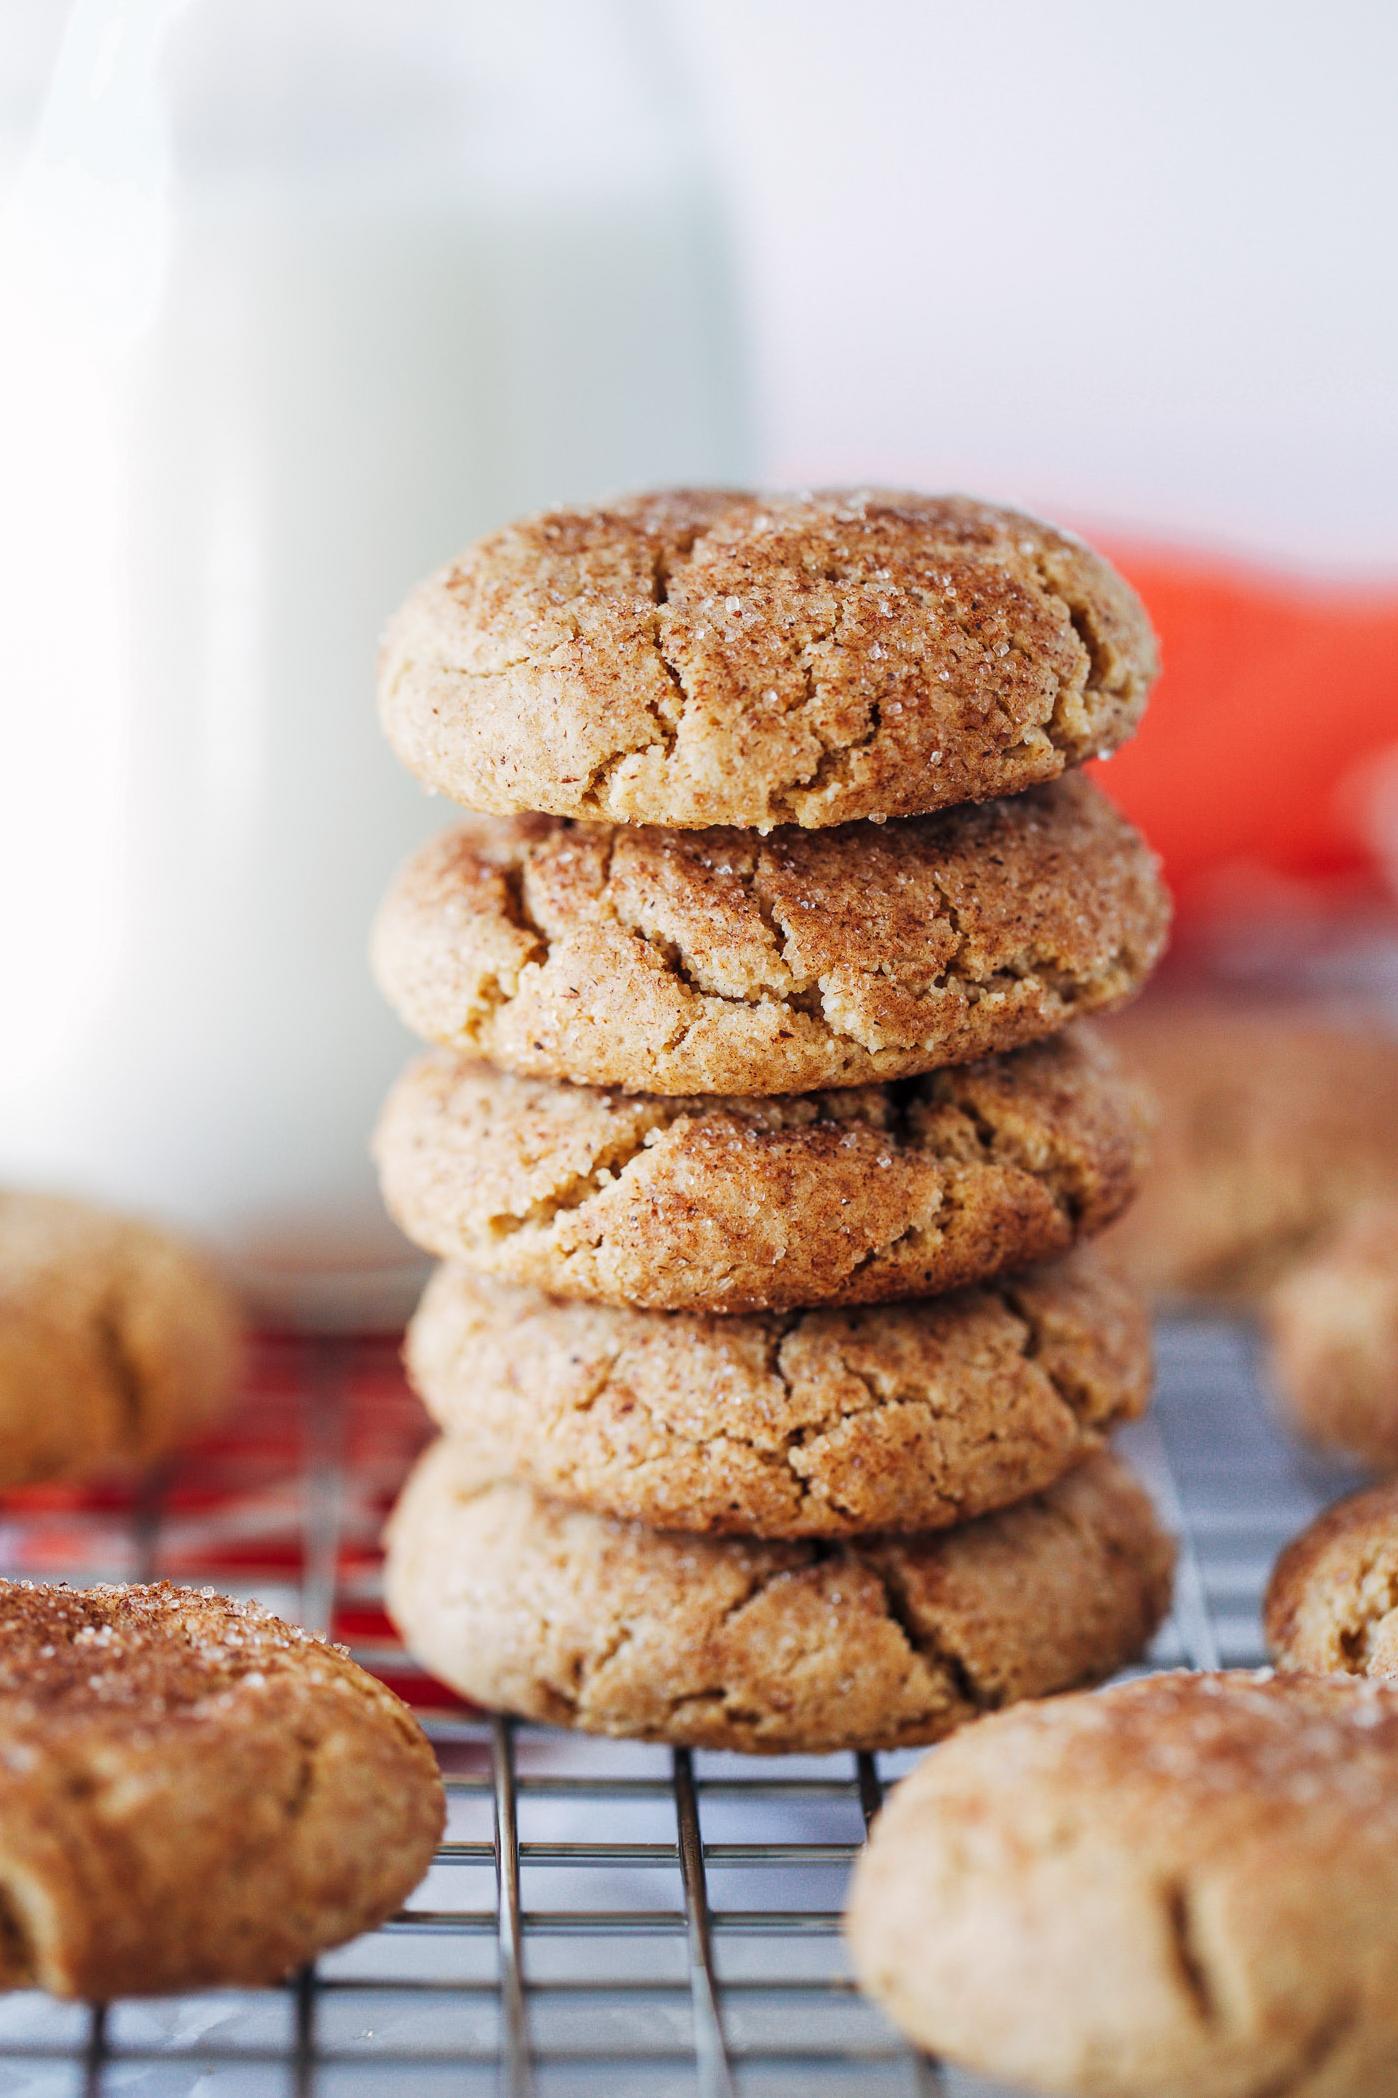  These vegan cookies are easy to make and taste just as good as the traditional version!